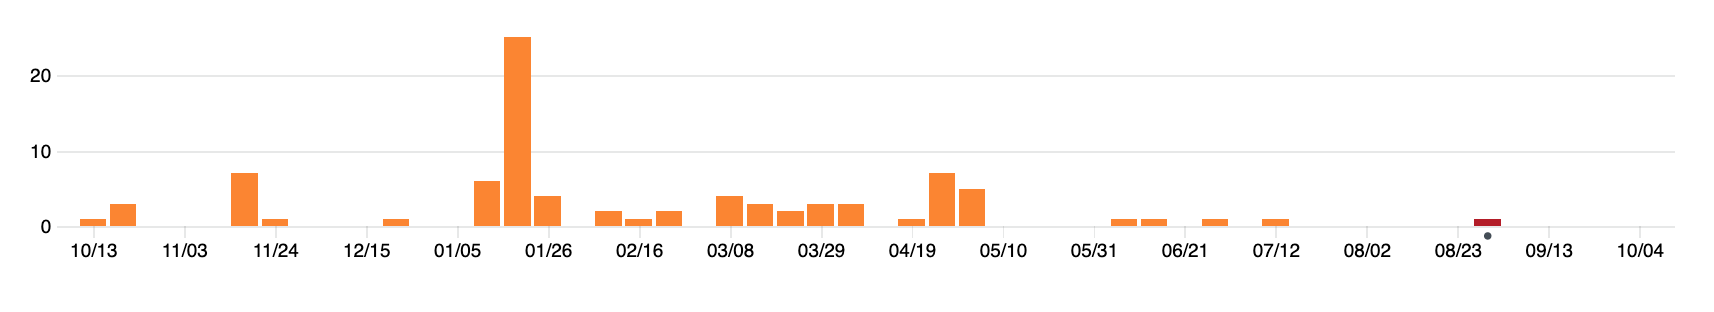 Commits in the last months